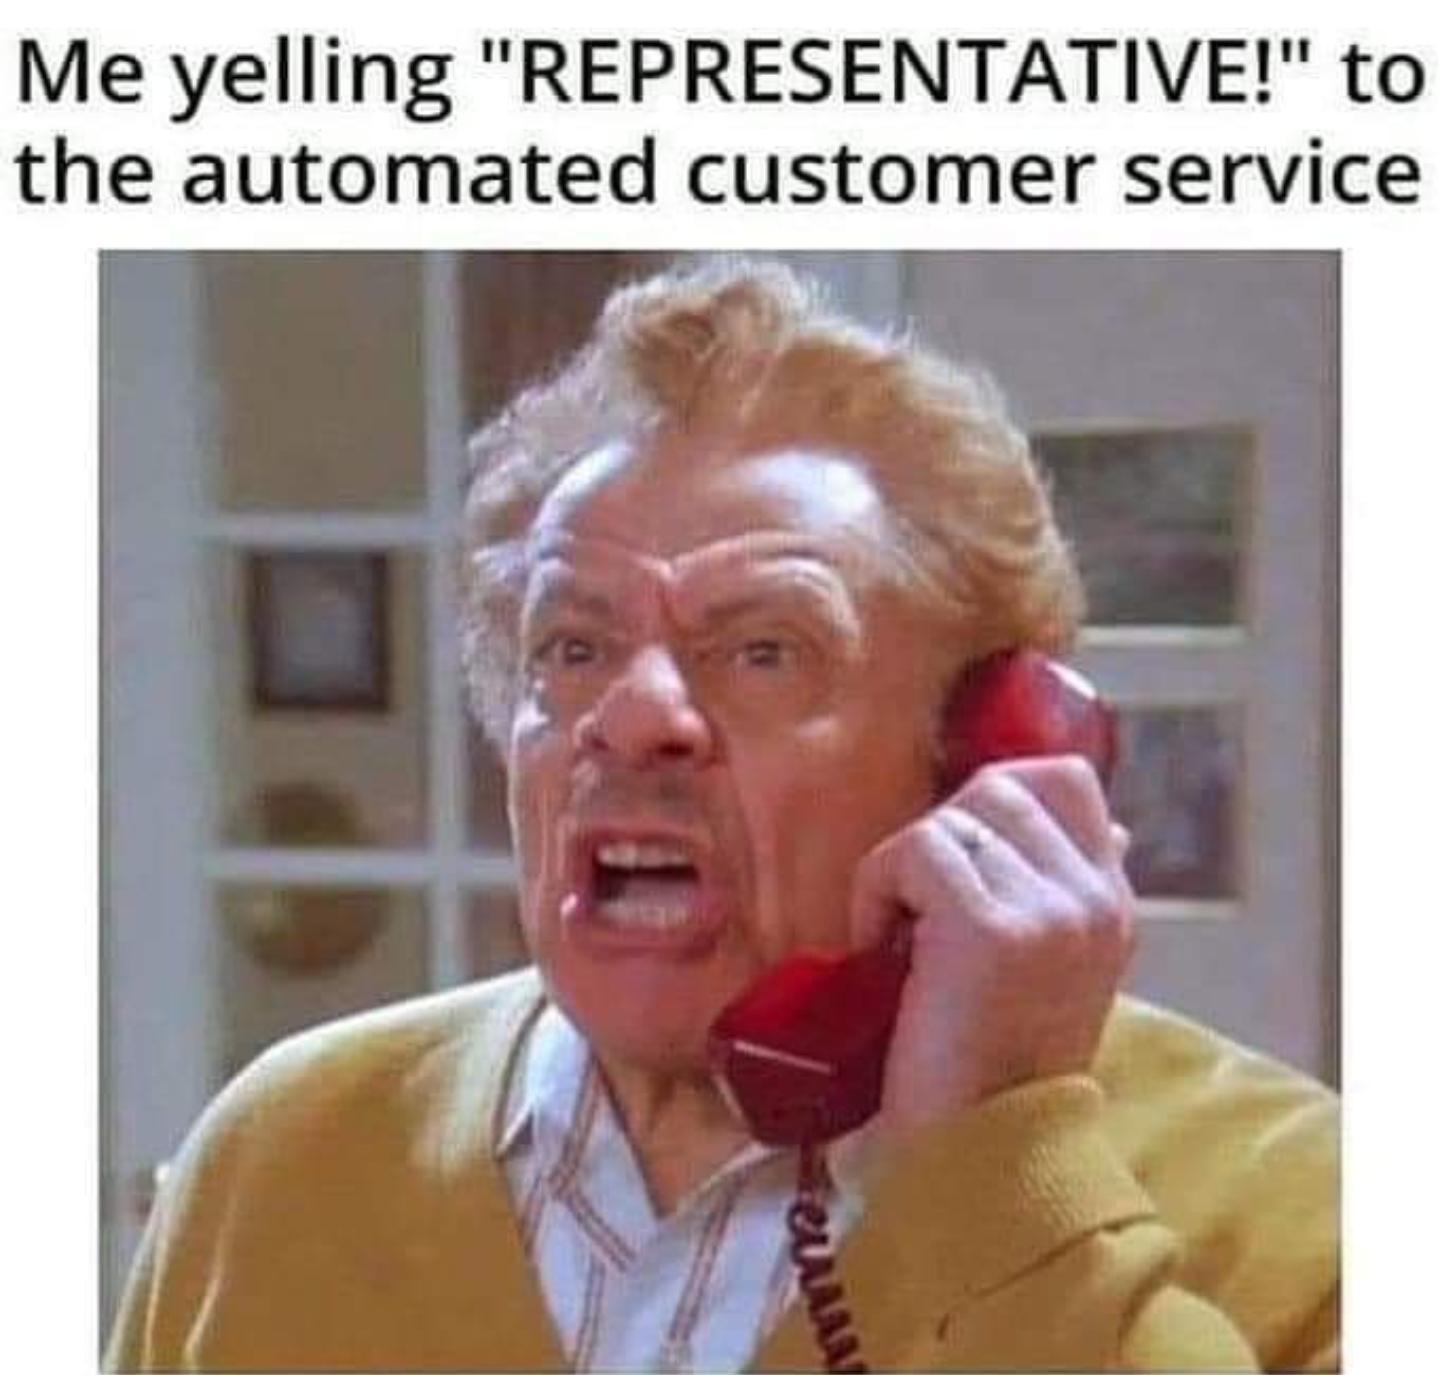 jerry stiller seinfeld - Me yelling "Representative!" to the automated customer service em